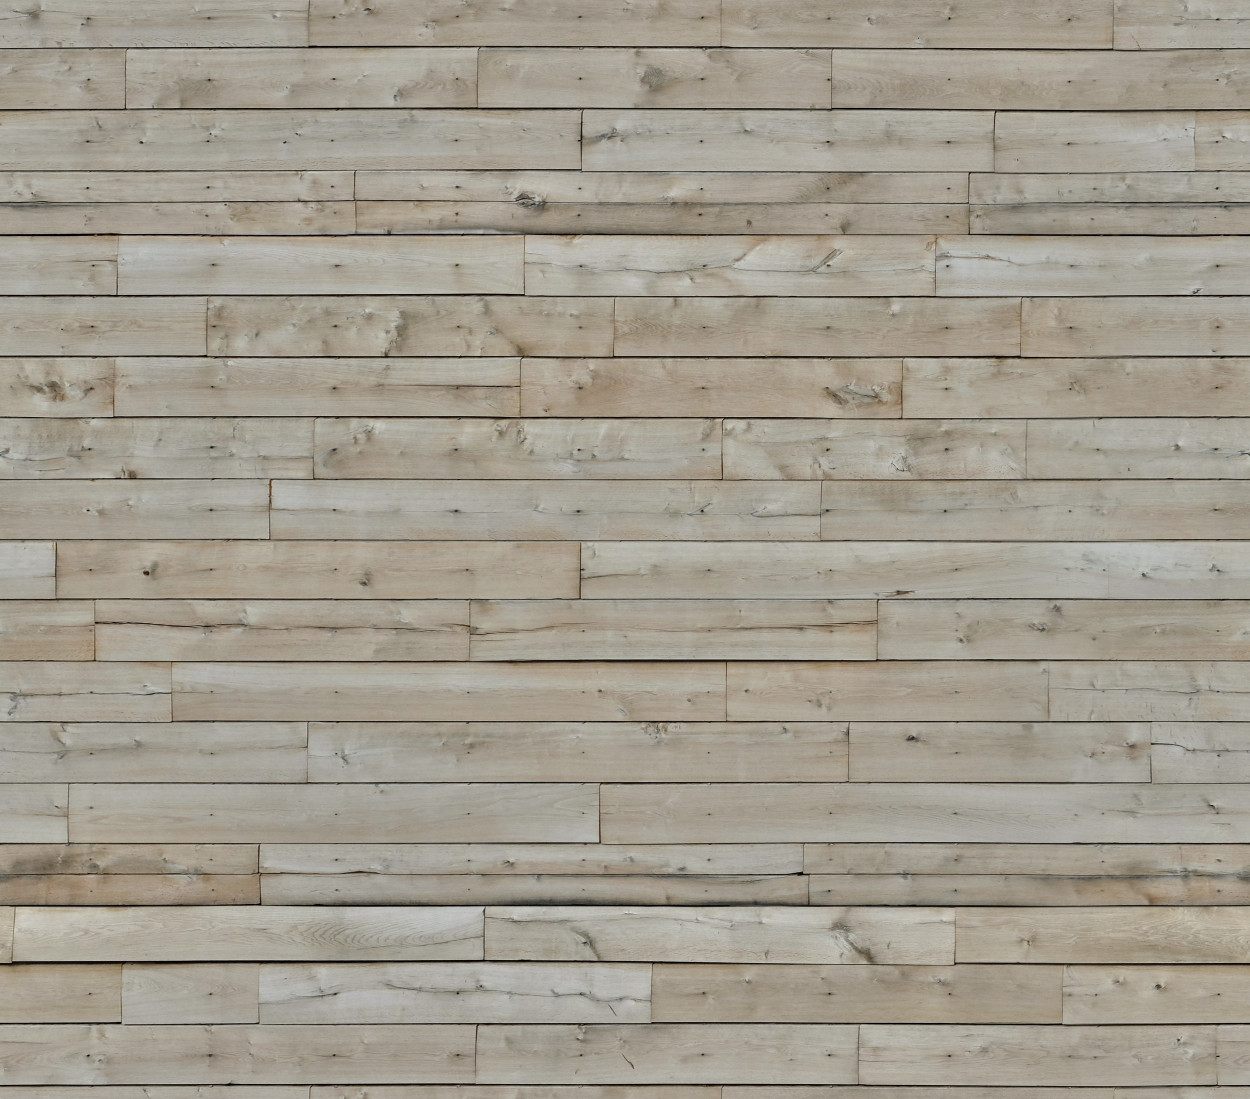 A seamless wood sleepers texture for use in architectural drawings and 3D models